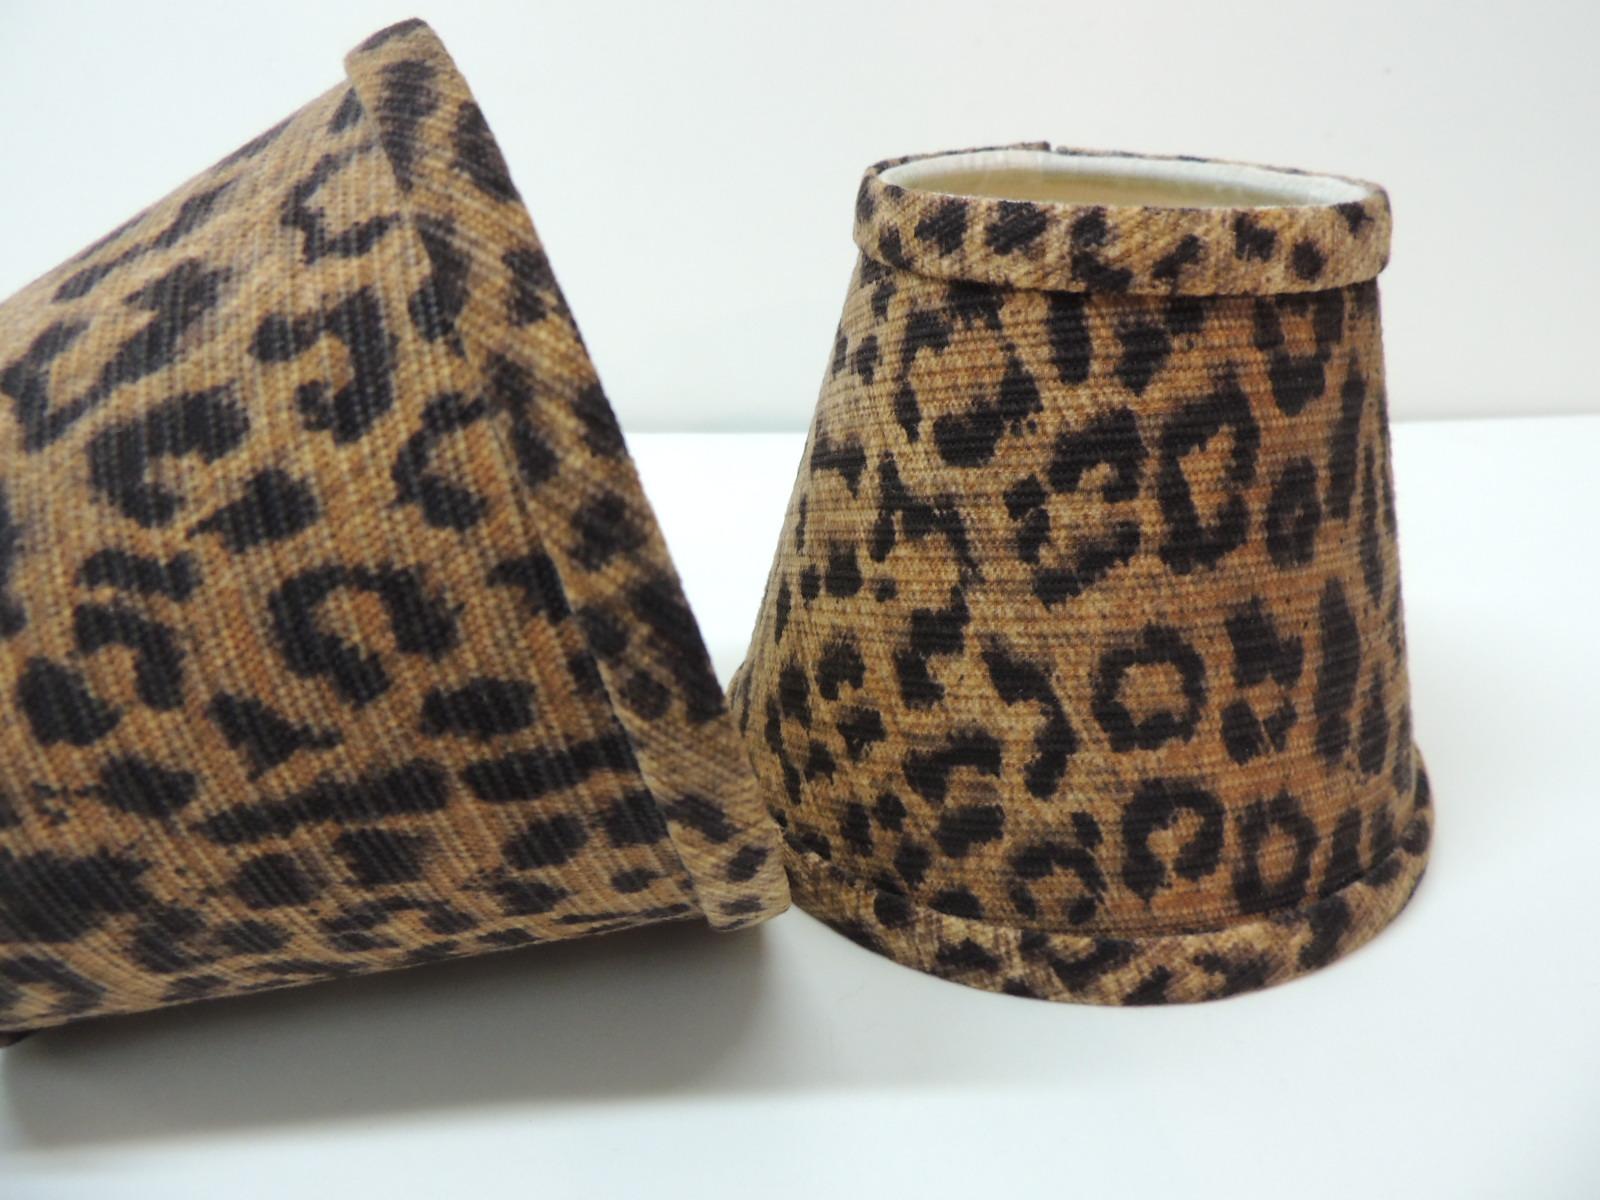 American Set of Two Small Candelabras Leopards Cotton Fabric Woven Lamp Shades